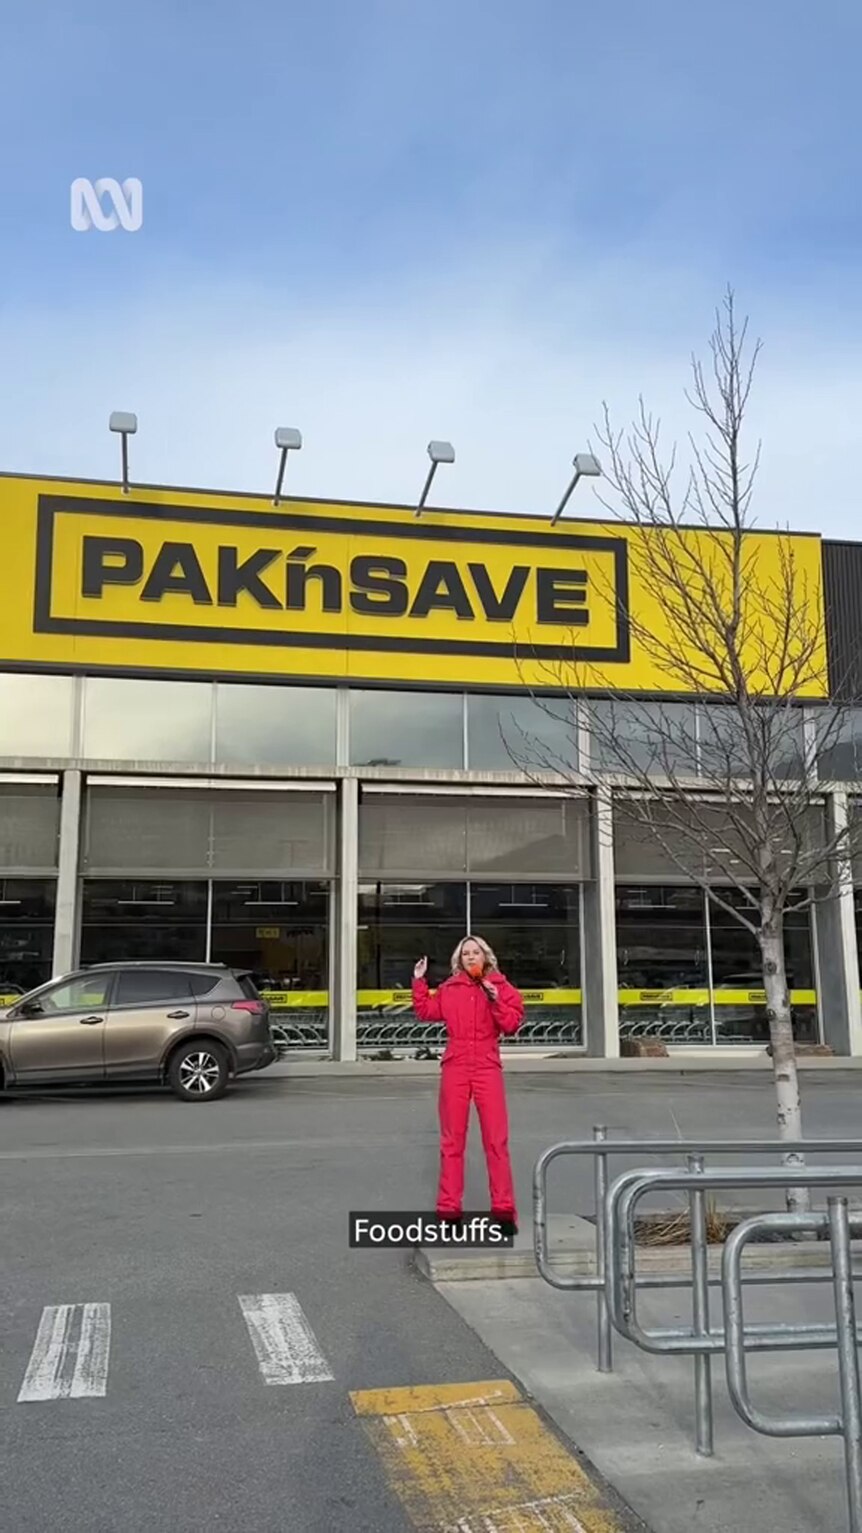 A young woman light-tone skin in a red snowsuit stands in a car park in front of a PAK'nSAVE 